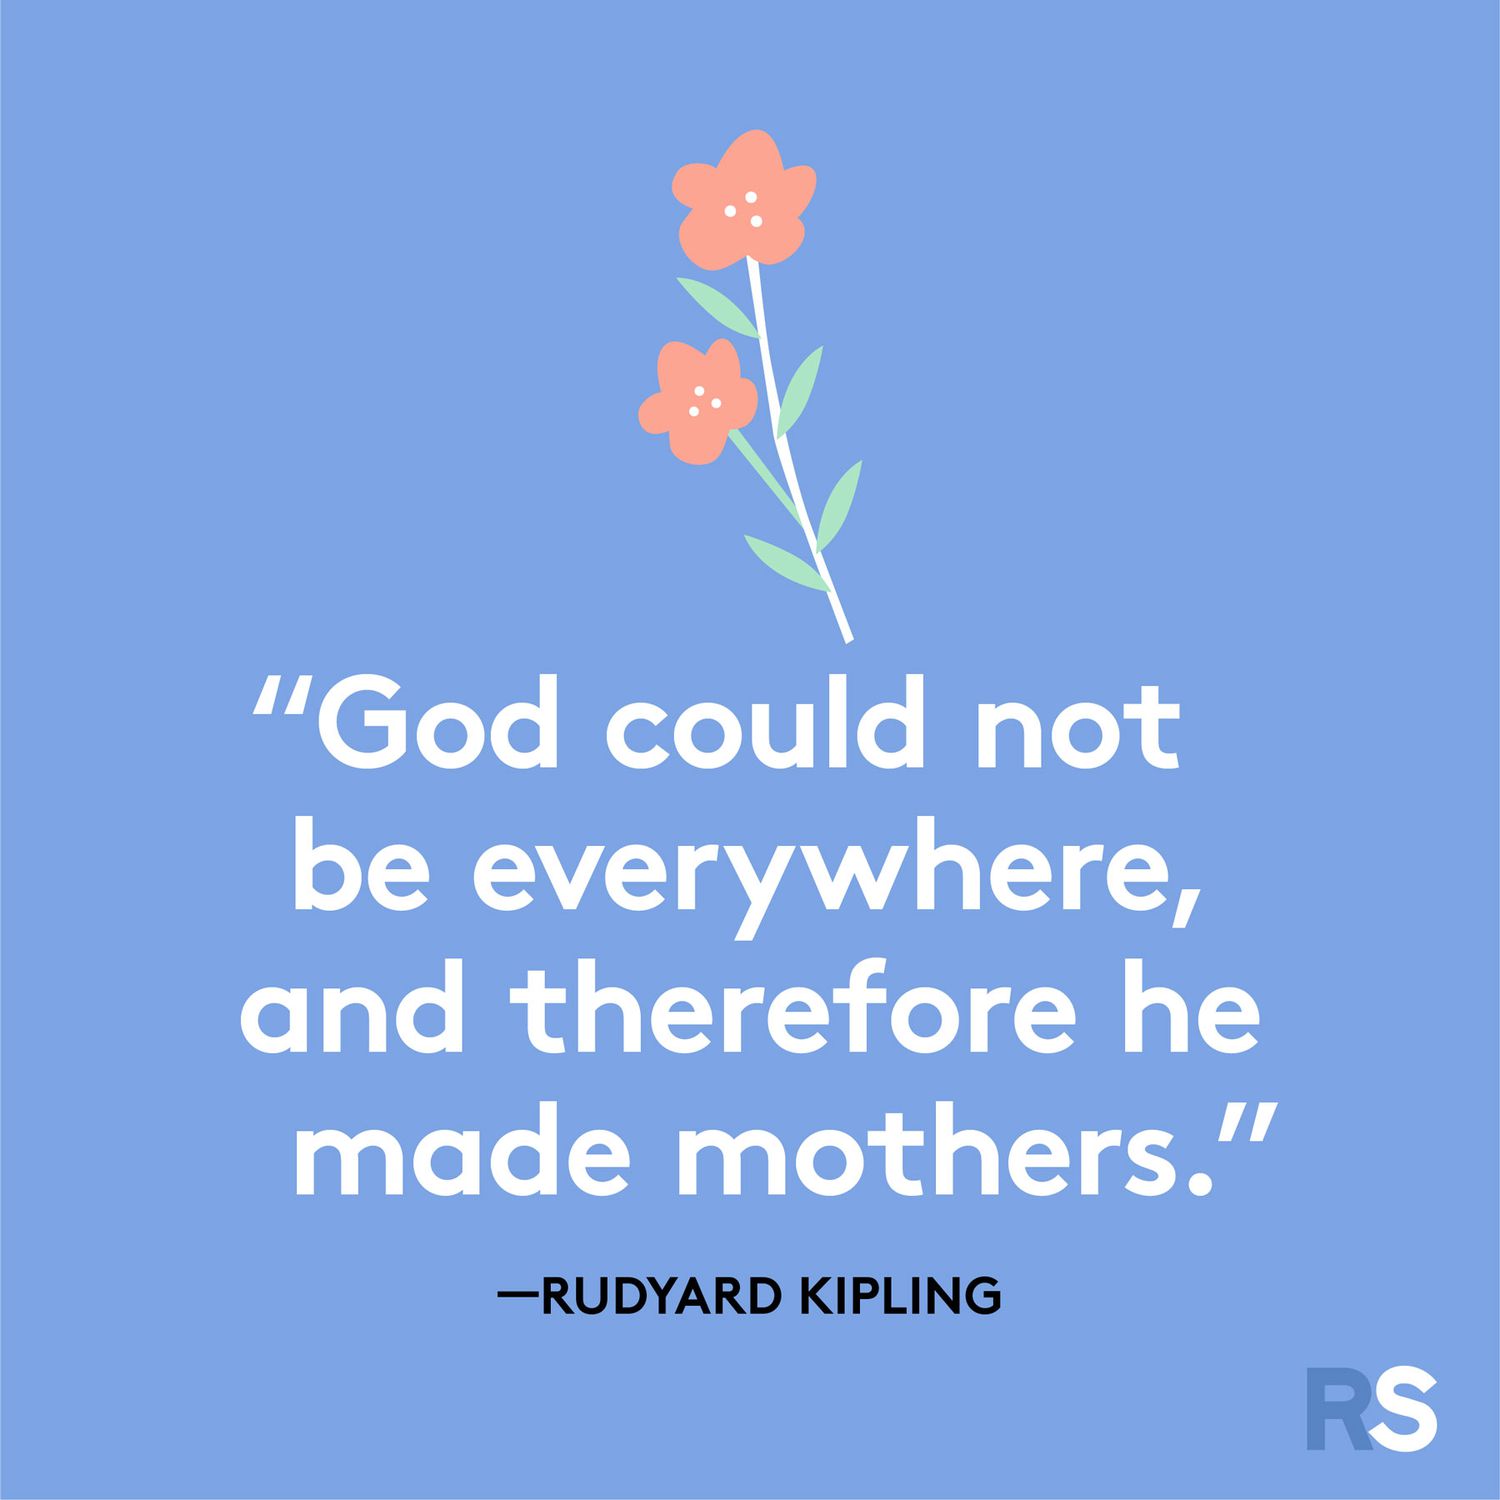 Mother's Day quotes and sayings - quote by Rudyard Kipling